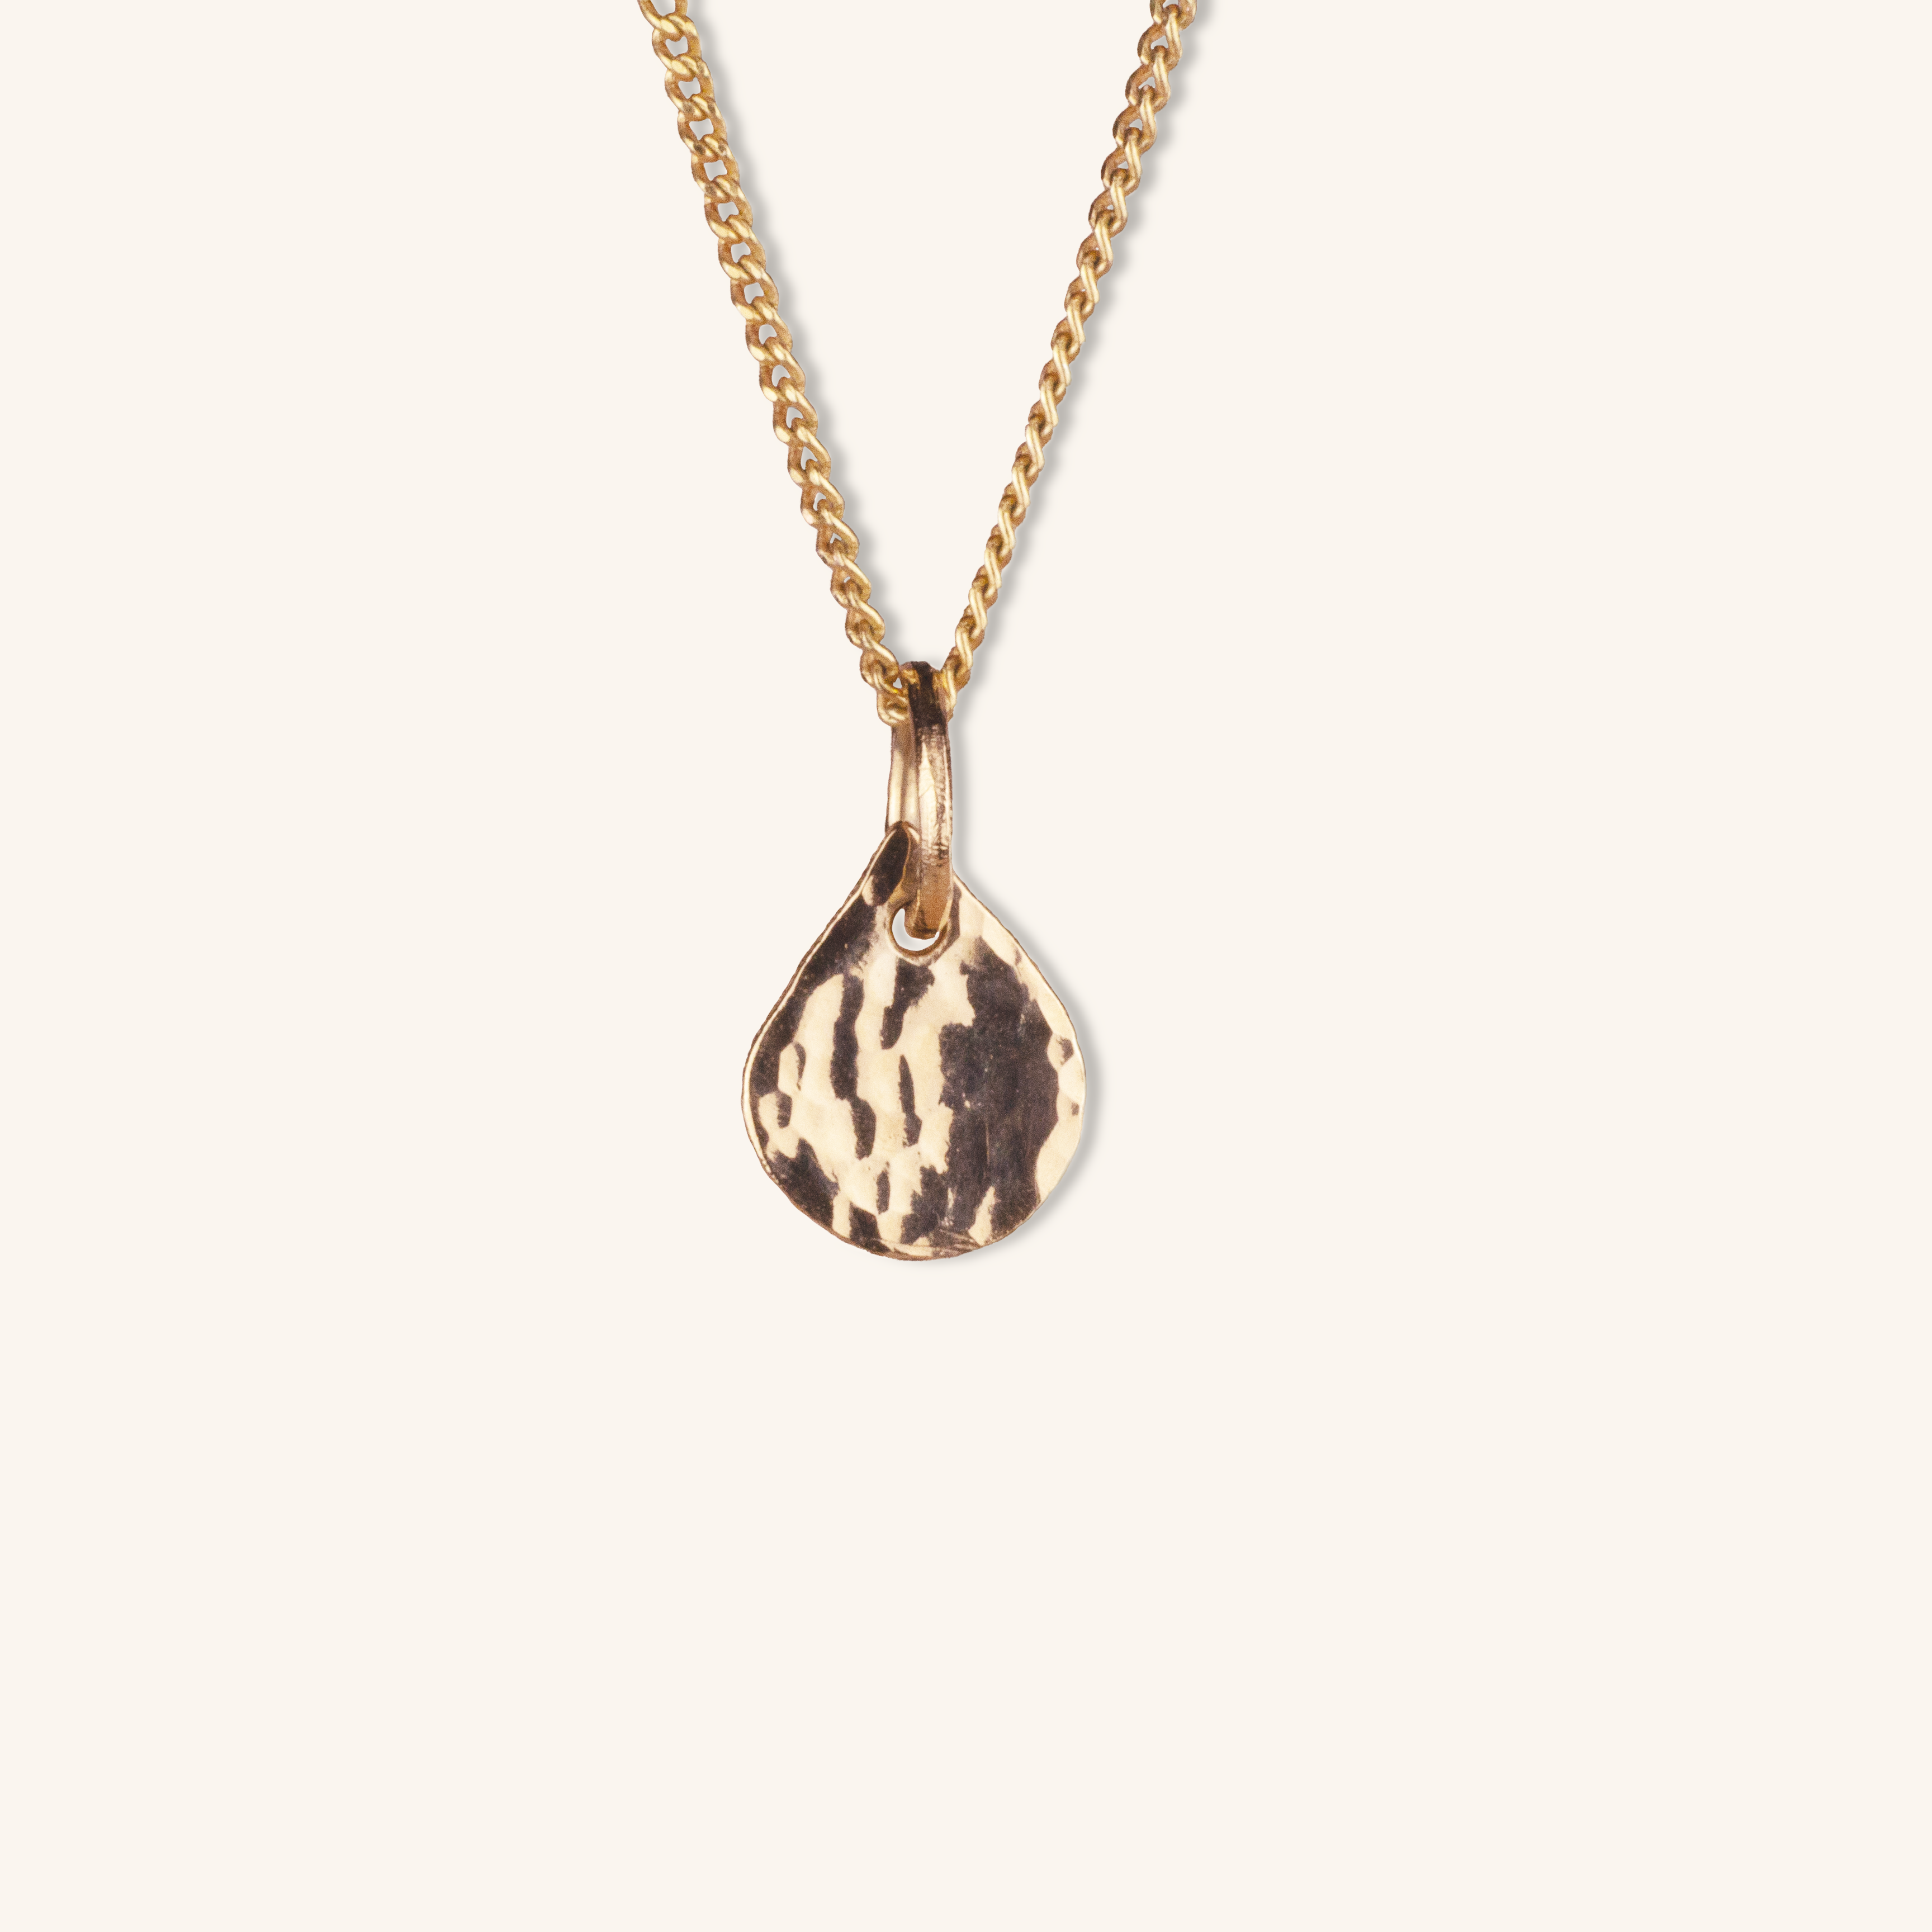 Tears of hope, Pendant Necklace 18K Gold